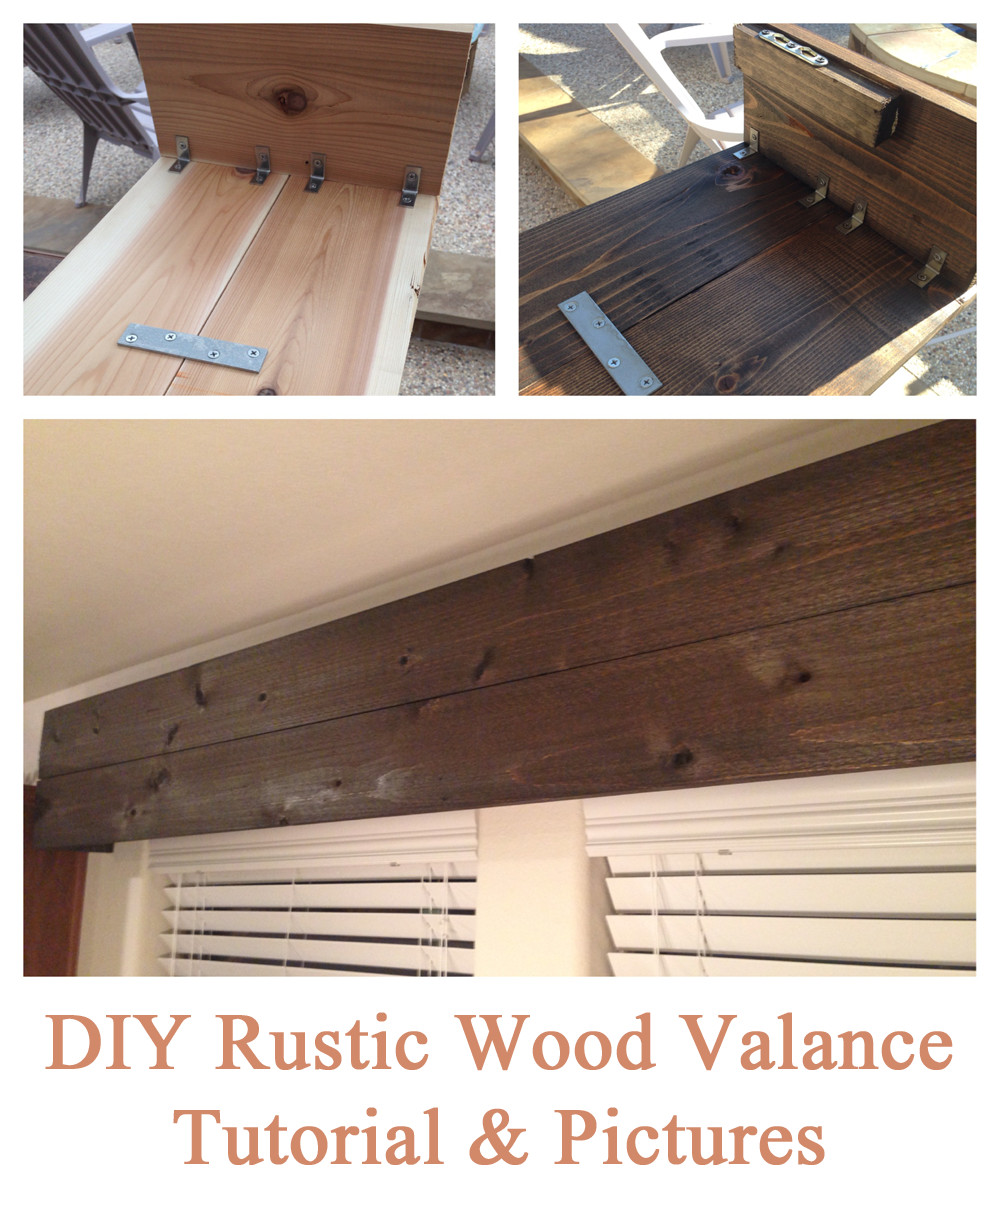 DIY Wood Valance
 Easy DIY tutorial for creating a rustic wood valance the